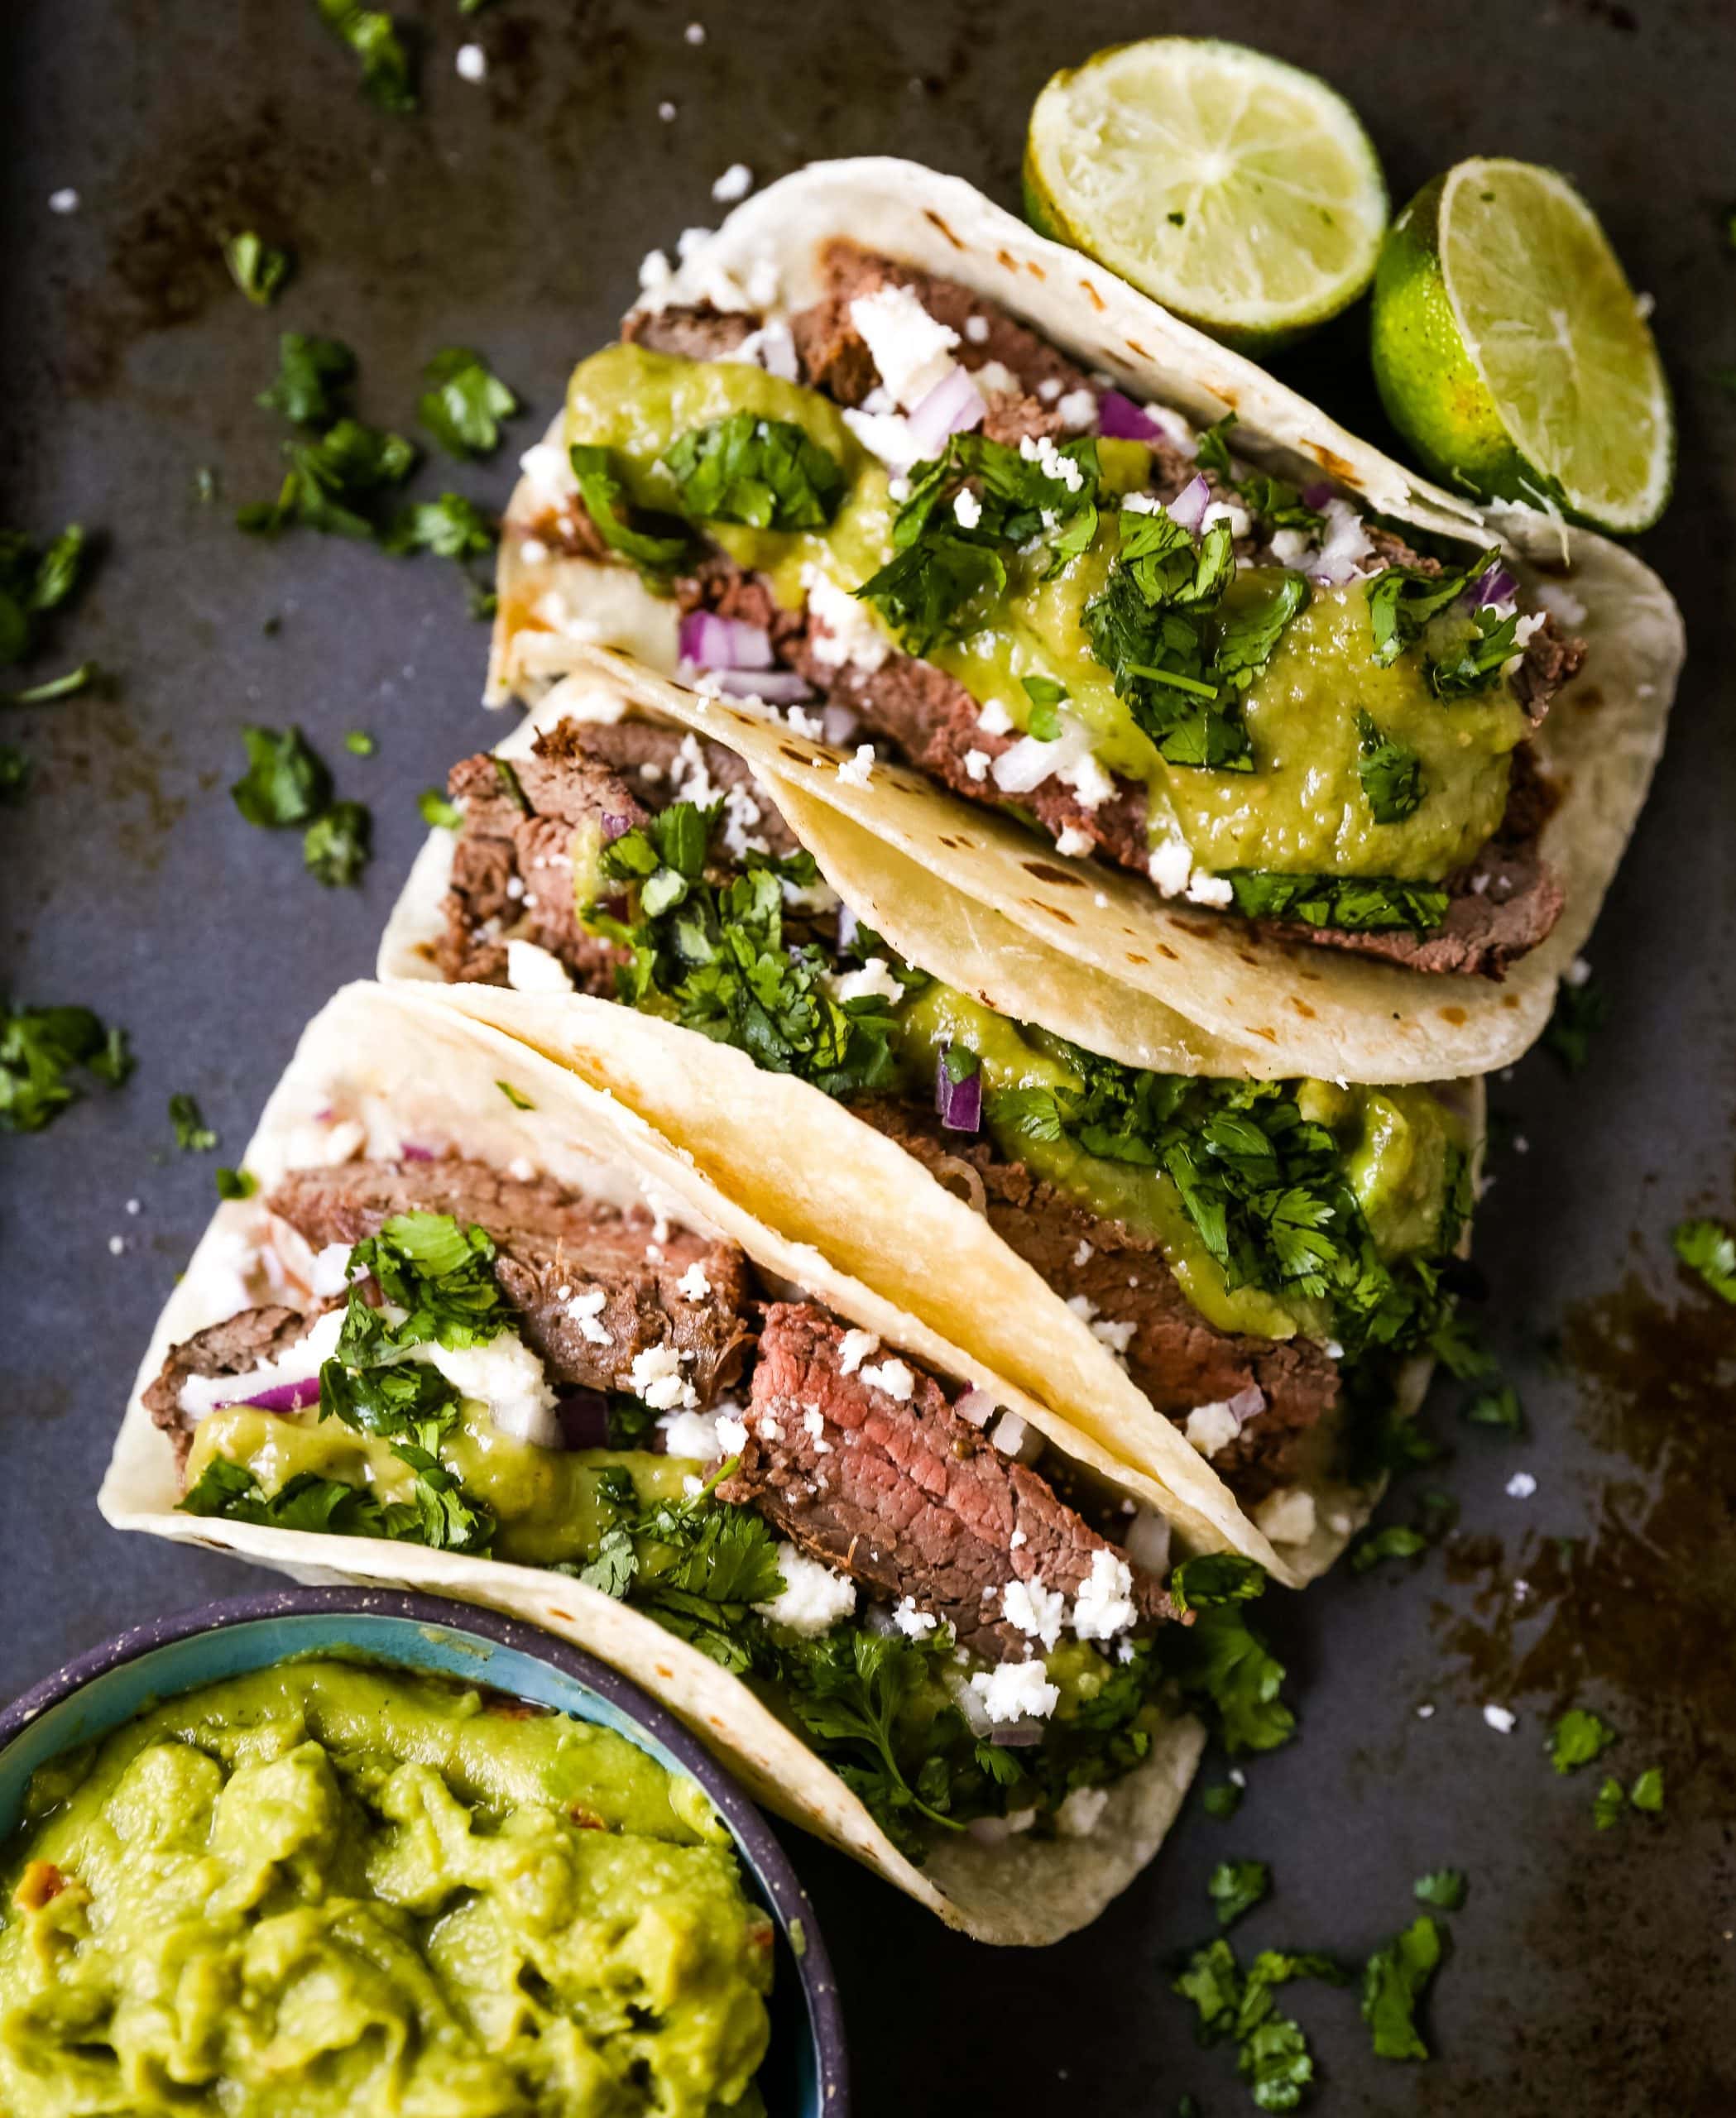 Grilled Steak Tacos. Juicy marinated grilled steak tacos with fresh cilantro, avocado, and salsa. The most flavorful and tender steak tacos recipe! www.modernhoney.com #tacos #steaktacos #steak #beeftacos